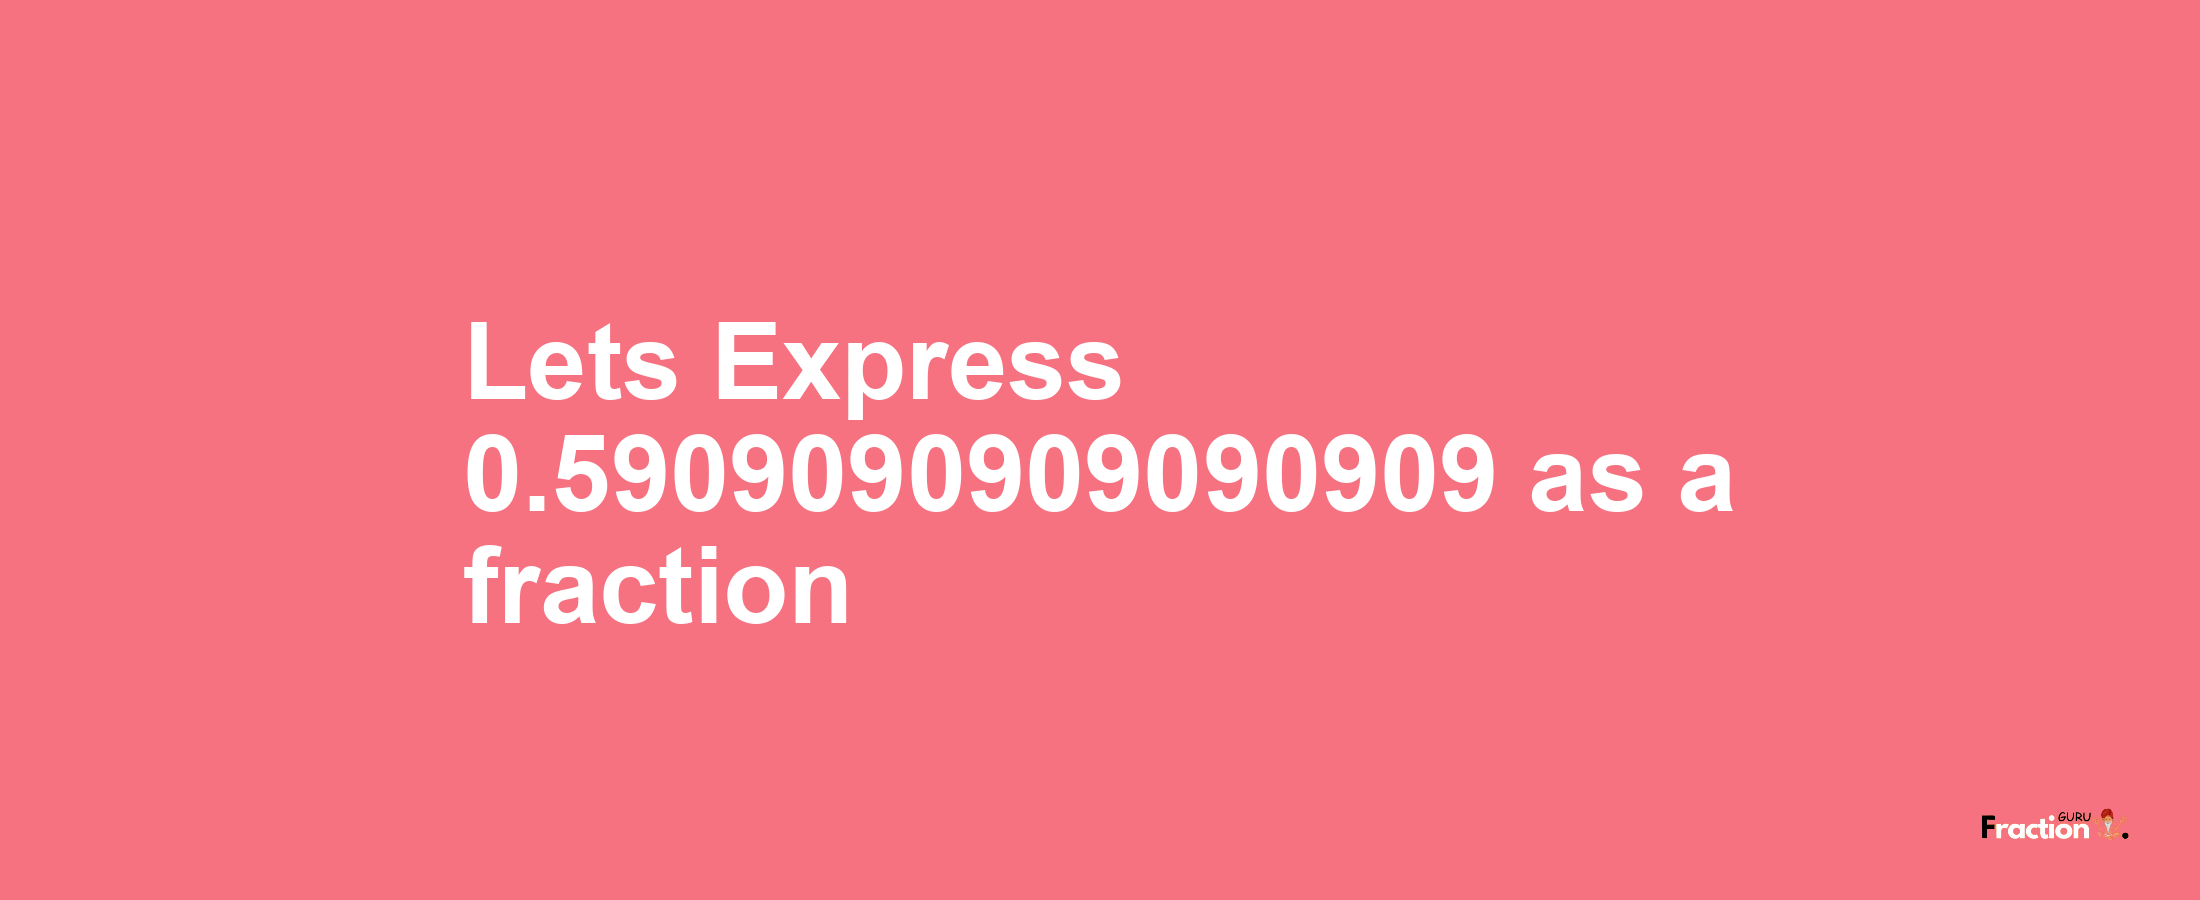 Lets Express 0.5909090909090909 as afraction